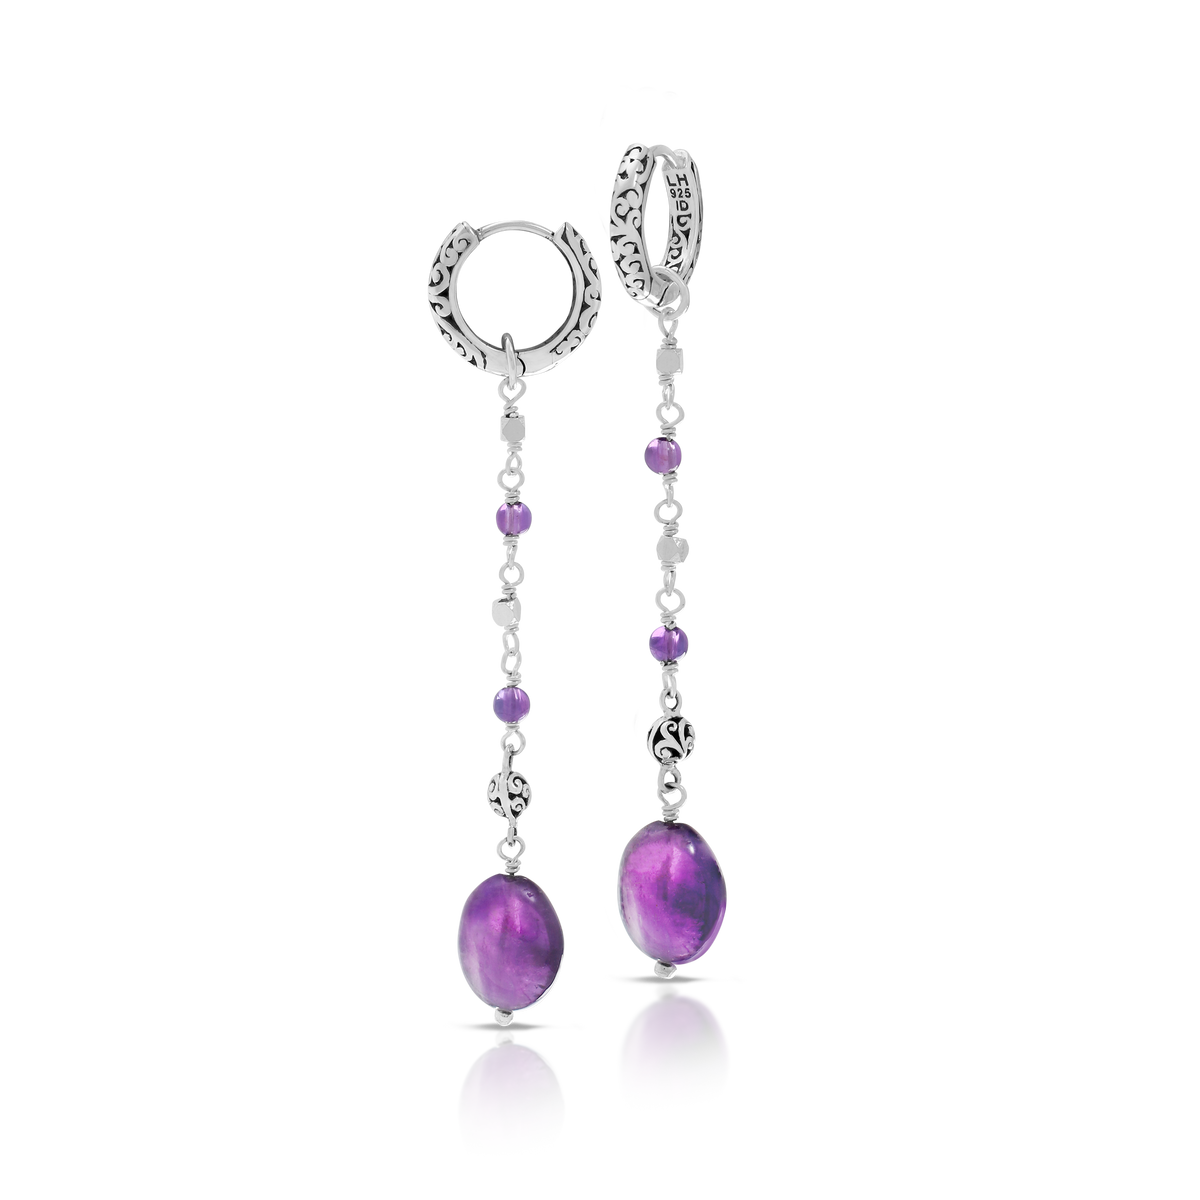 Oval Amethyst (8mmx12mm) with Delicated Scroll Hoop Drop Earring